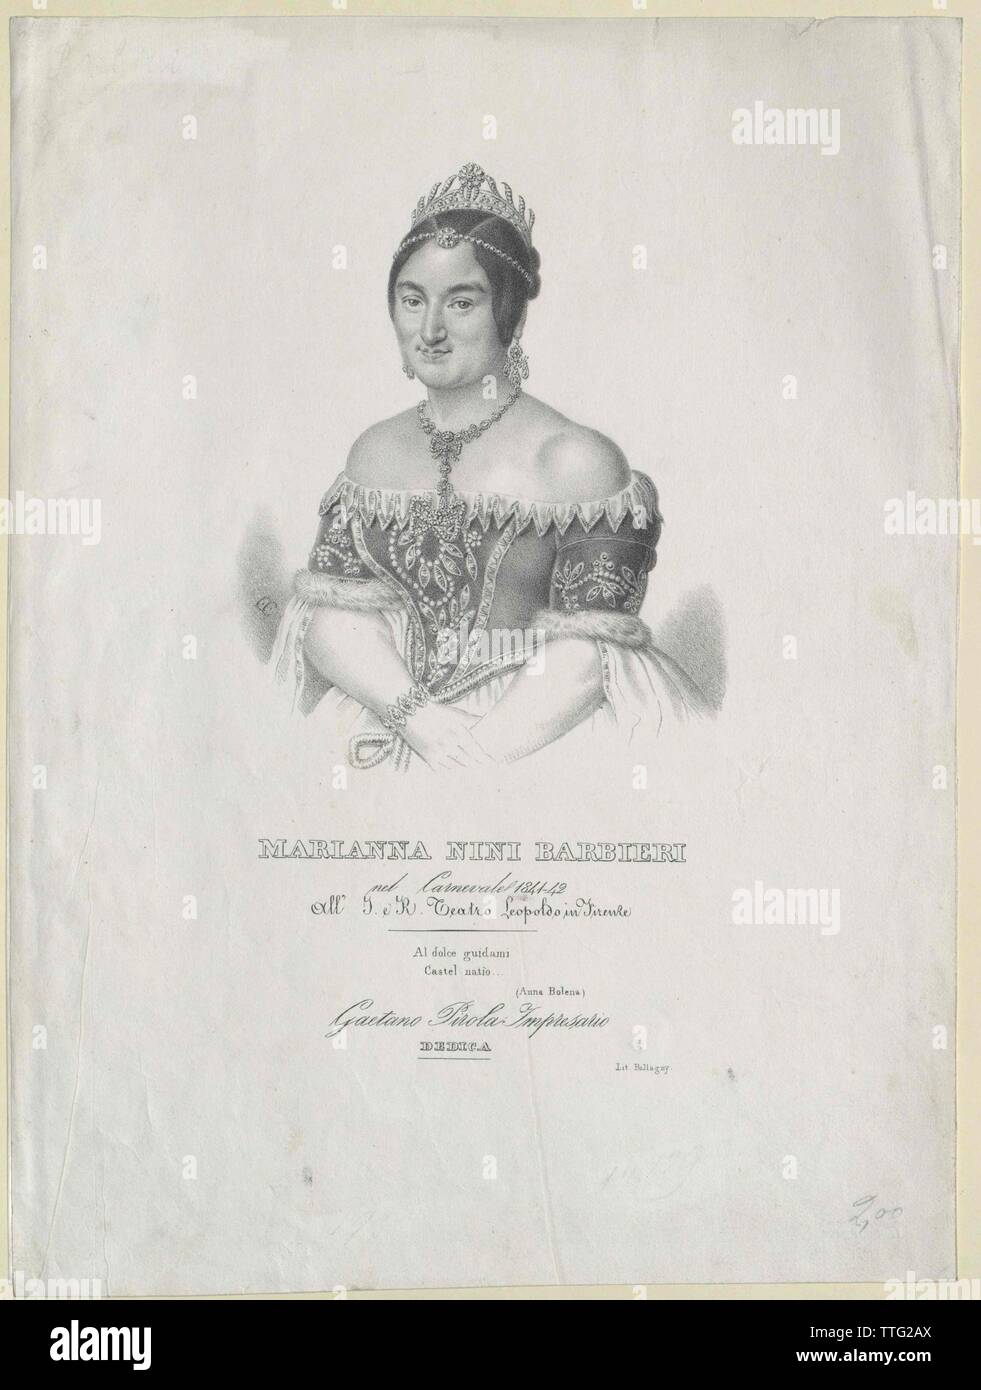 Barbieri, Marianna, songstress Italiano, membro dell'Opera Viennese 1848, Additional-Rights-Clearance-Info-Not-Available Foto Stock